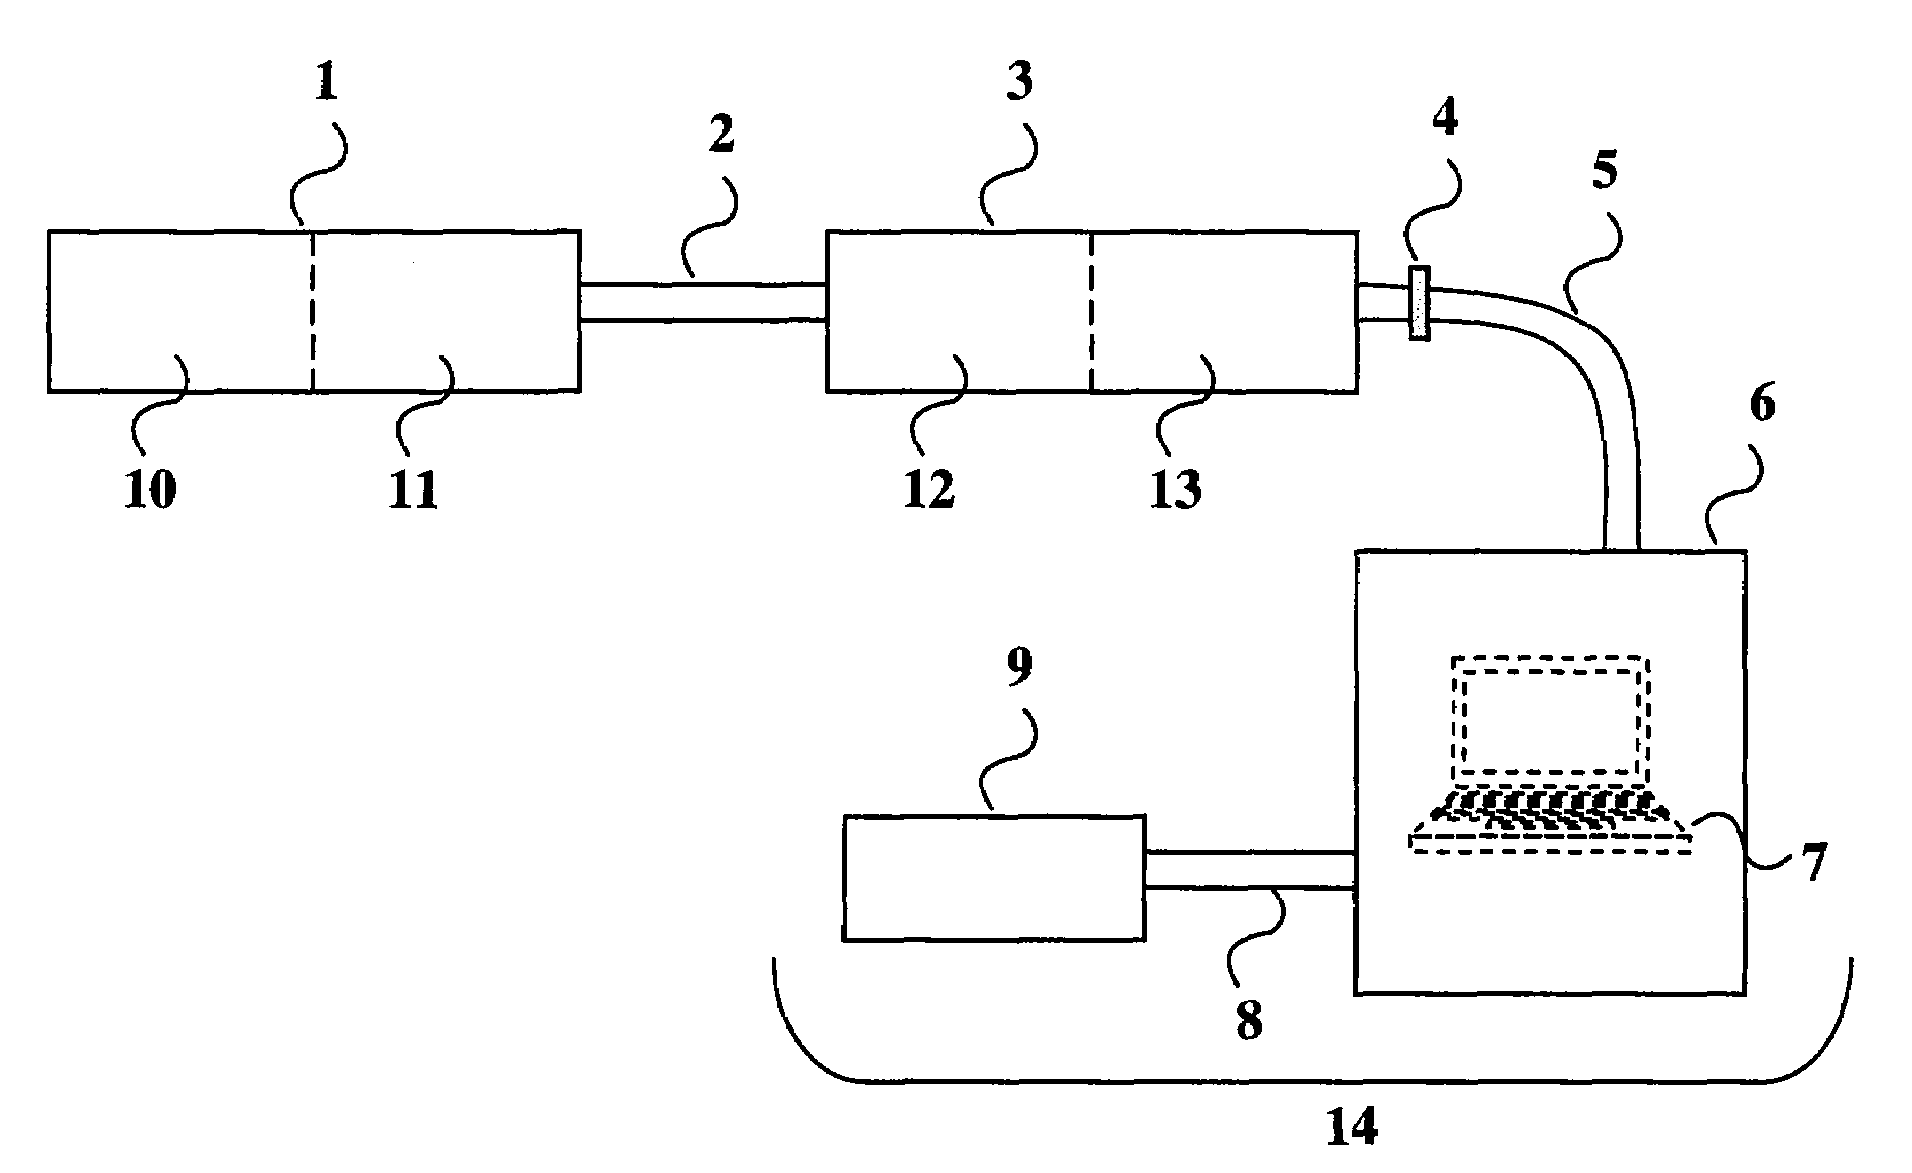 Method and apparatus to coat objects with parylene